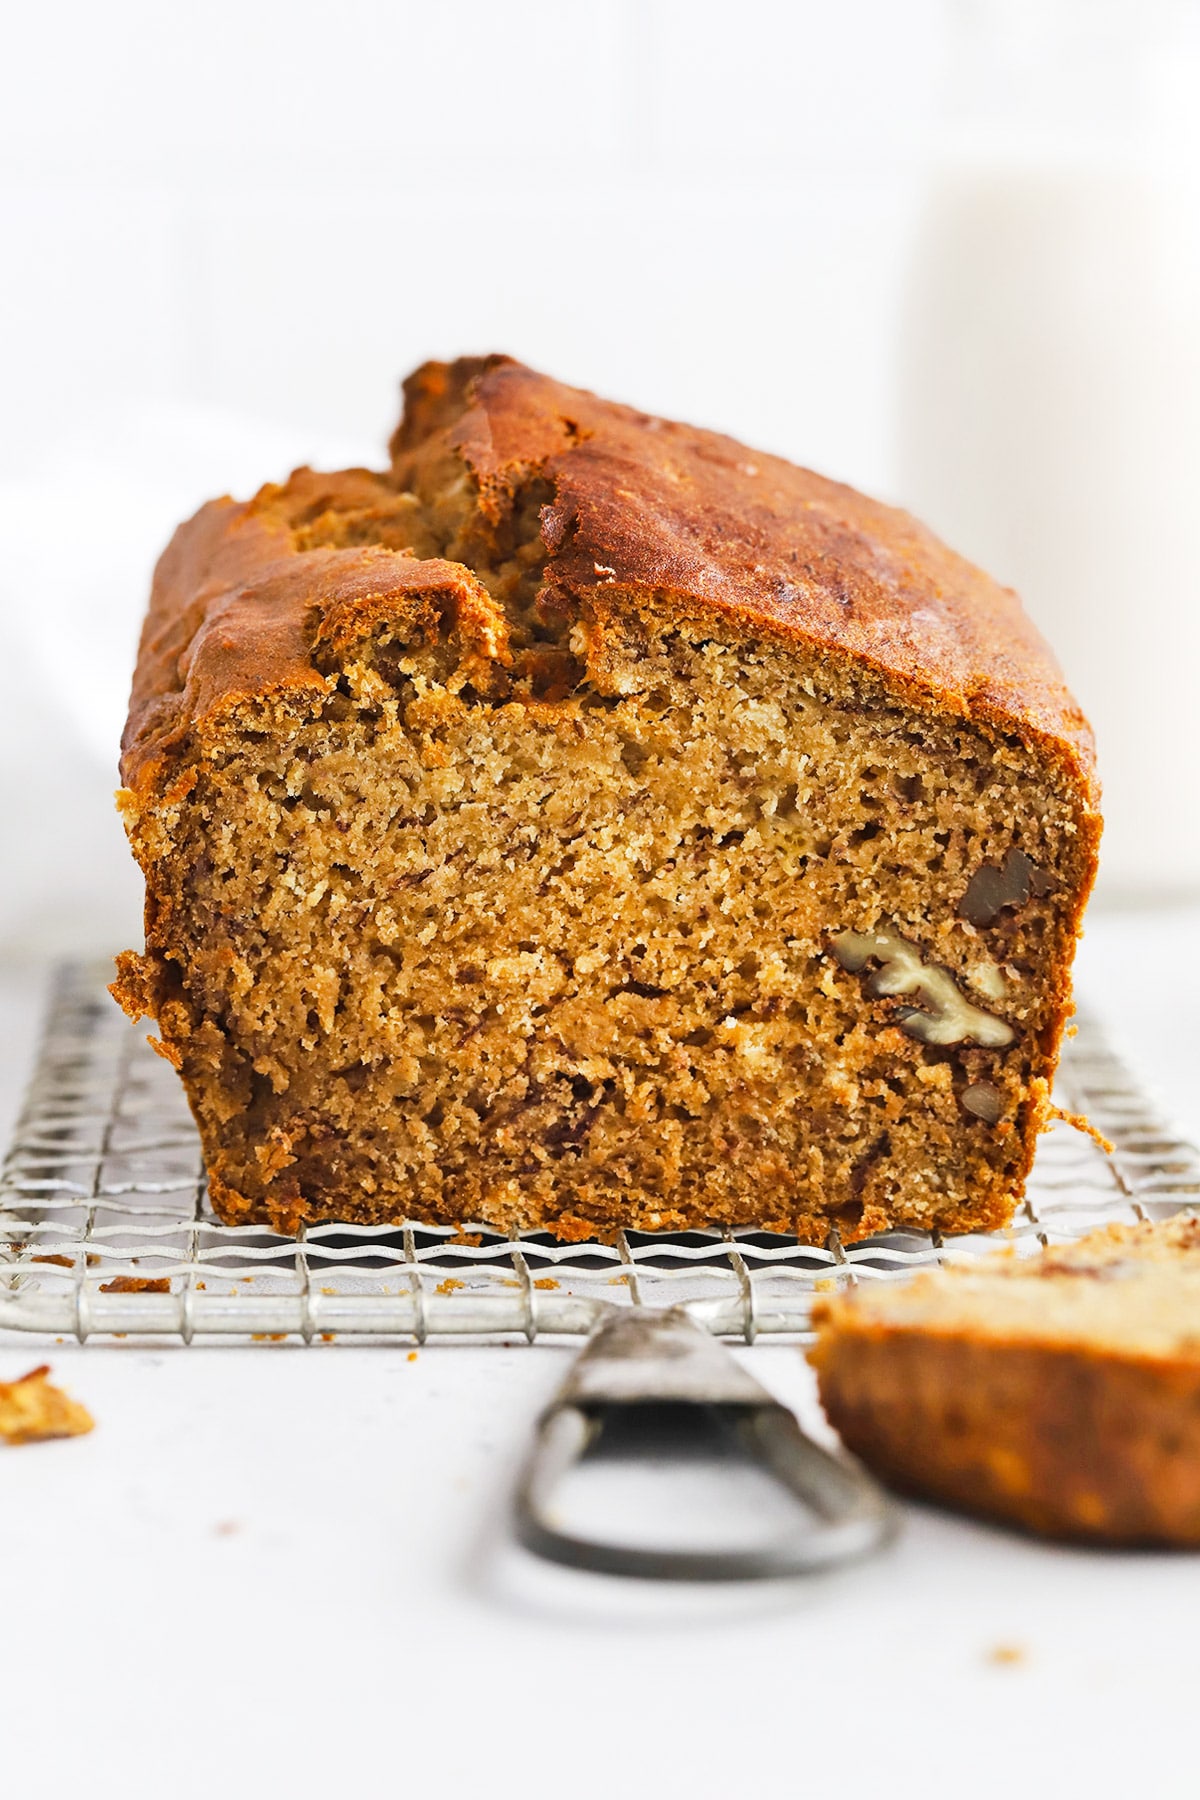 How To Tell When Banana Bread Is Done